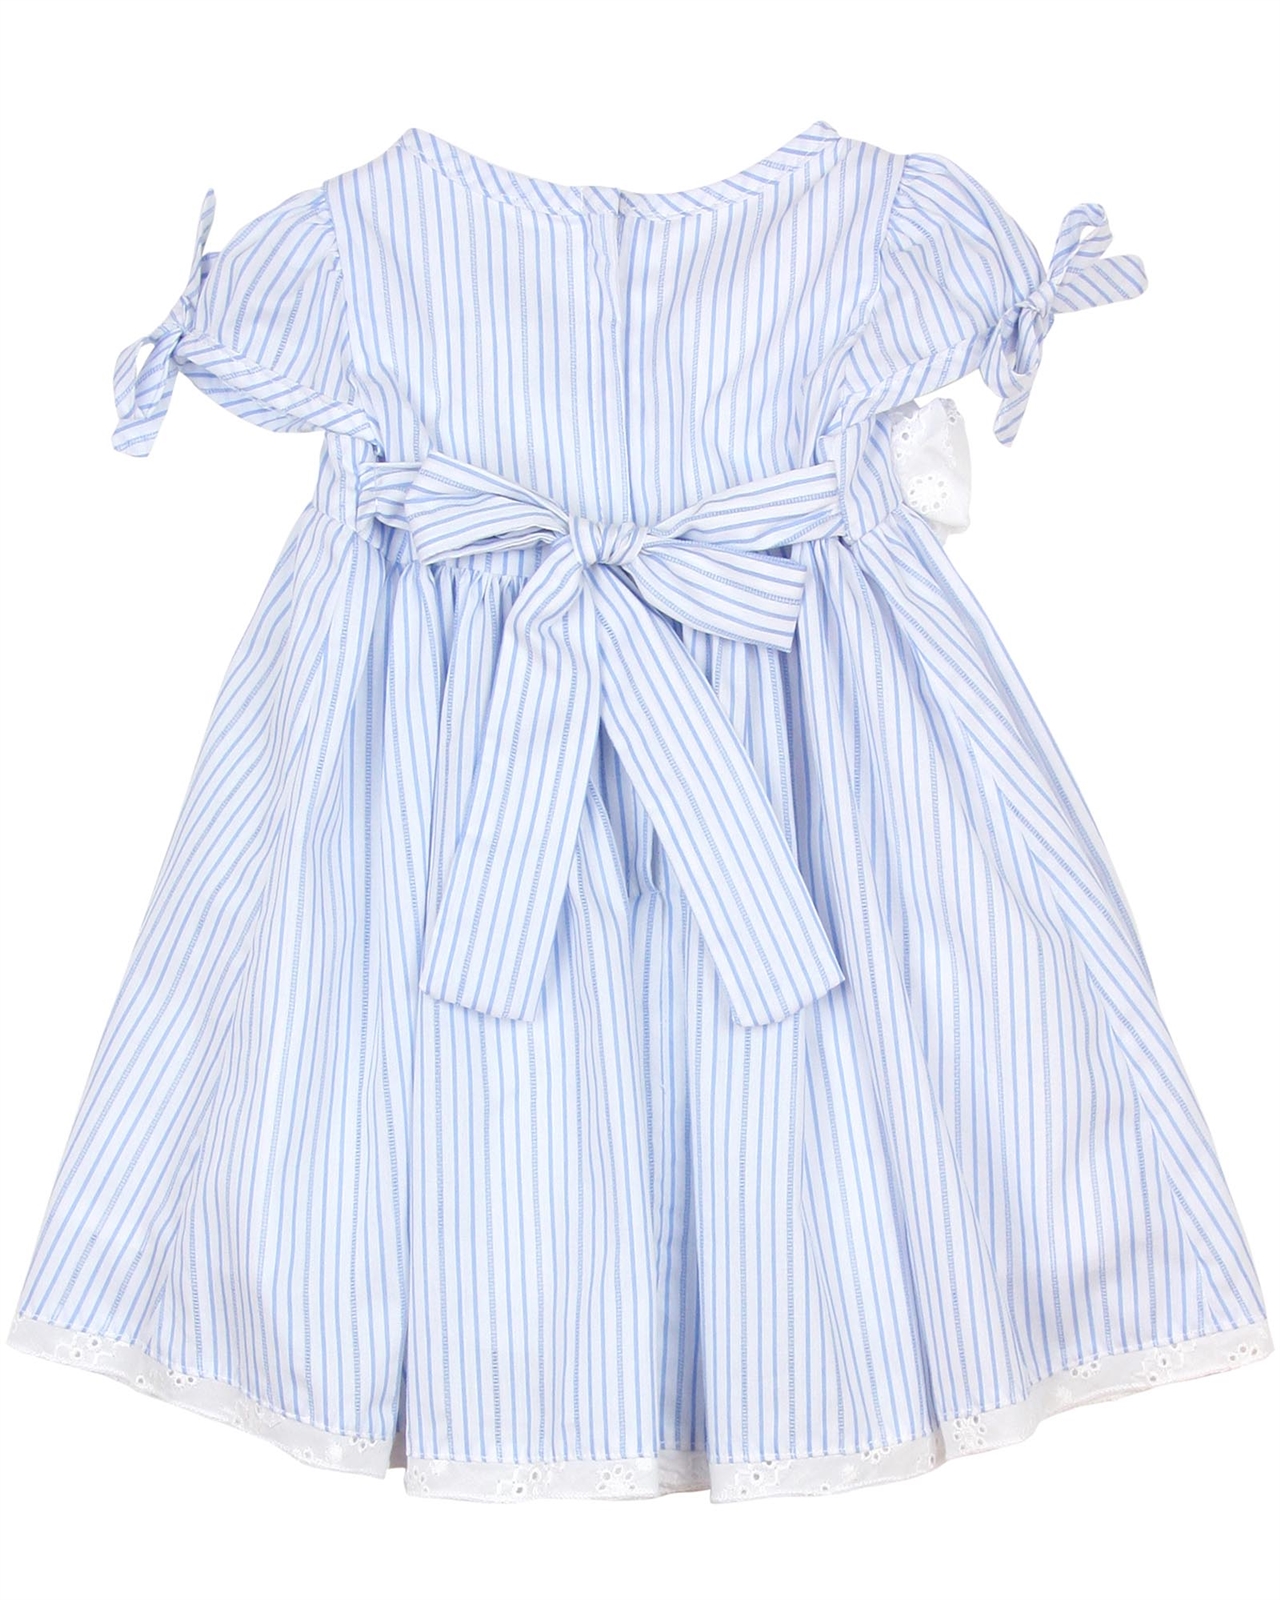 Biscotti Girls Dress with Puff Sleeves | Biscotti and Kate Mack ...